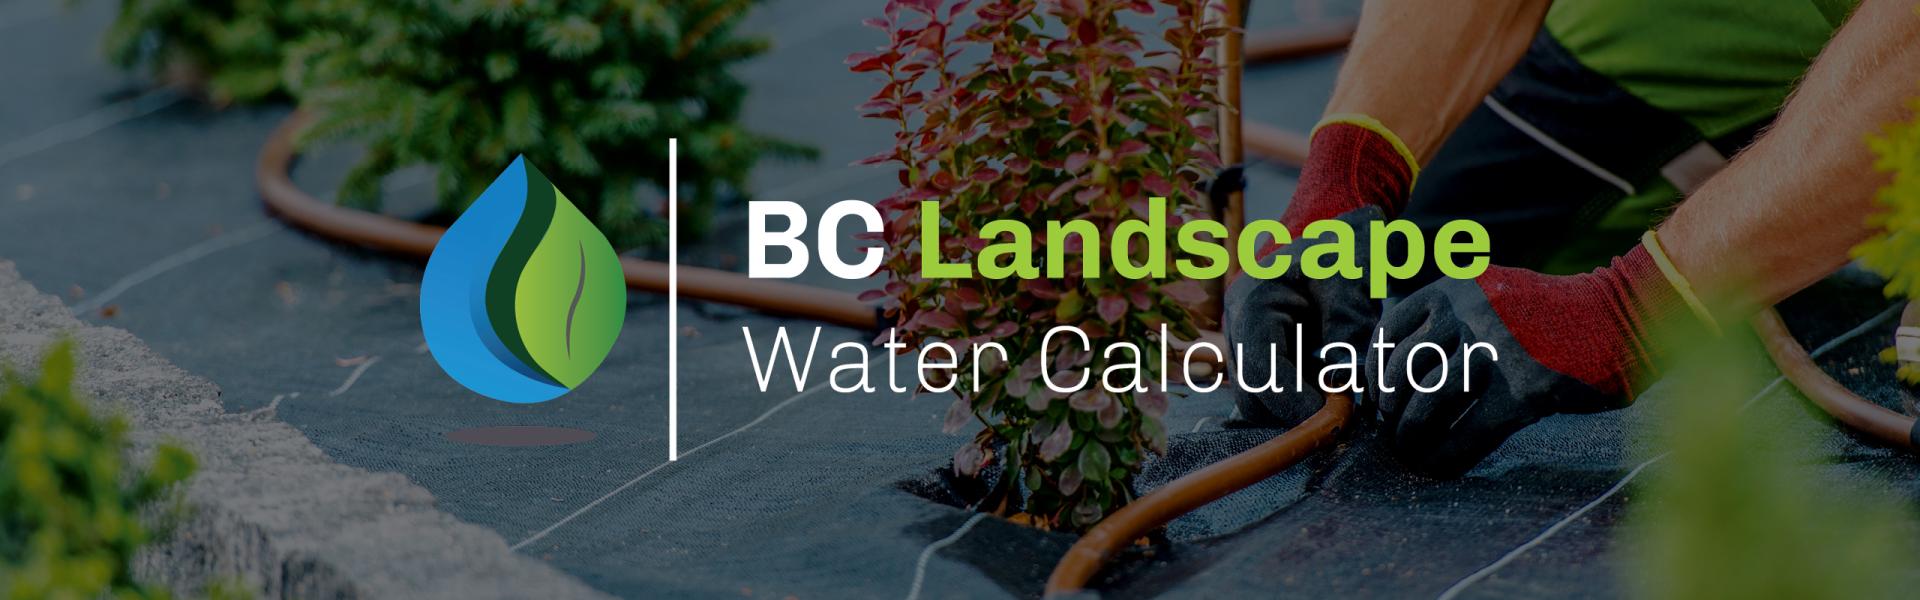 Banner image of landscape with BC Landscape Water Calculator logo overlaid on top